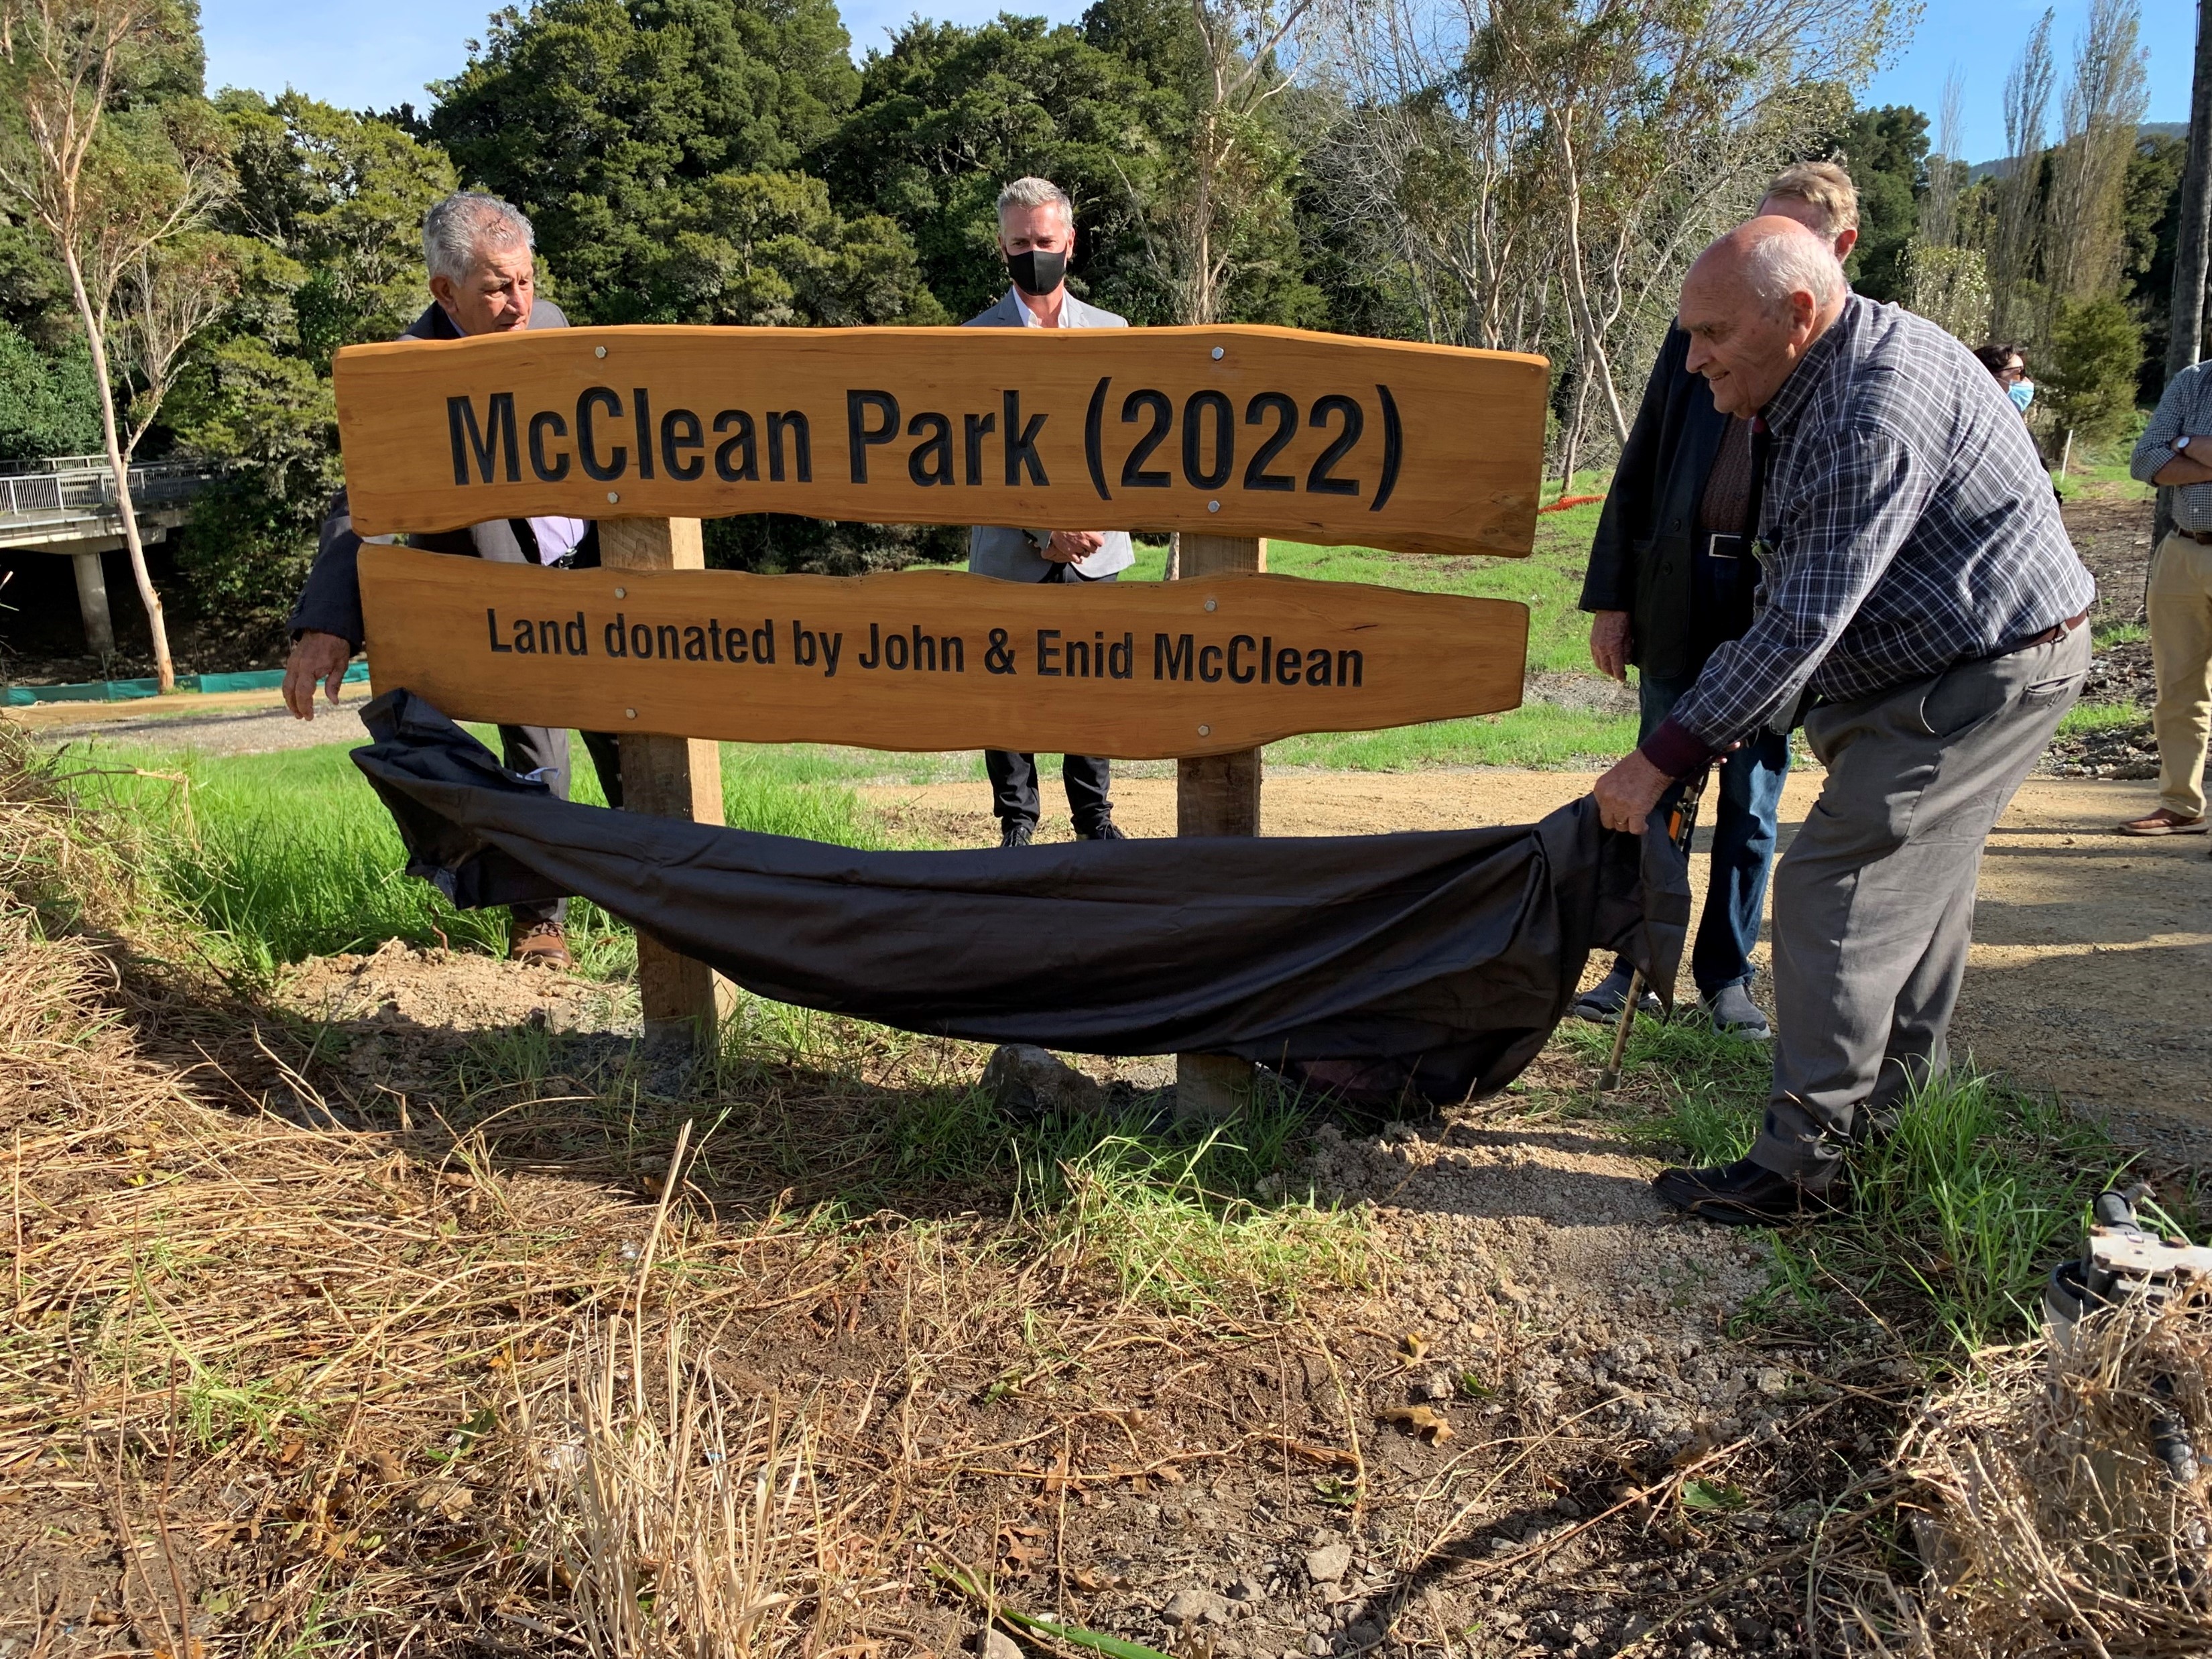 John McClean is unveiling a sign noting the land he and his wife have donated to the Kaiwaka community